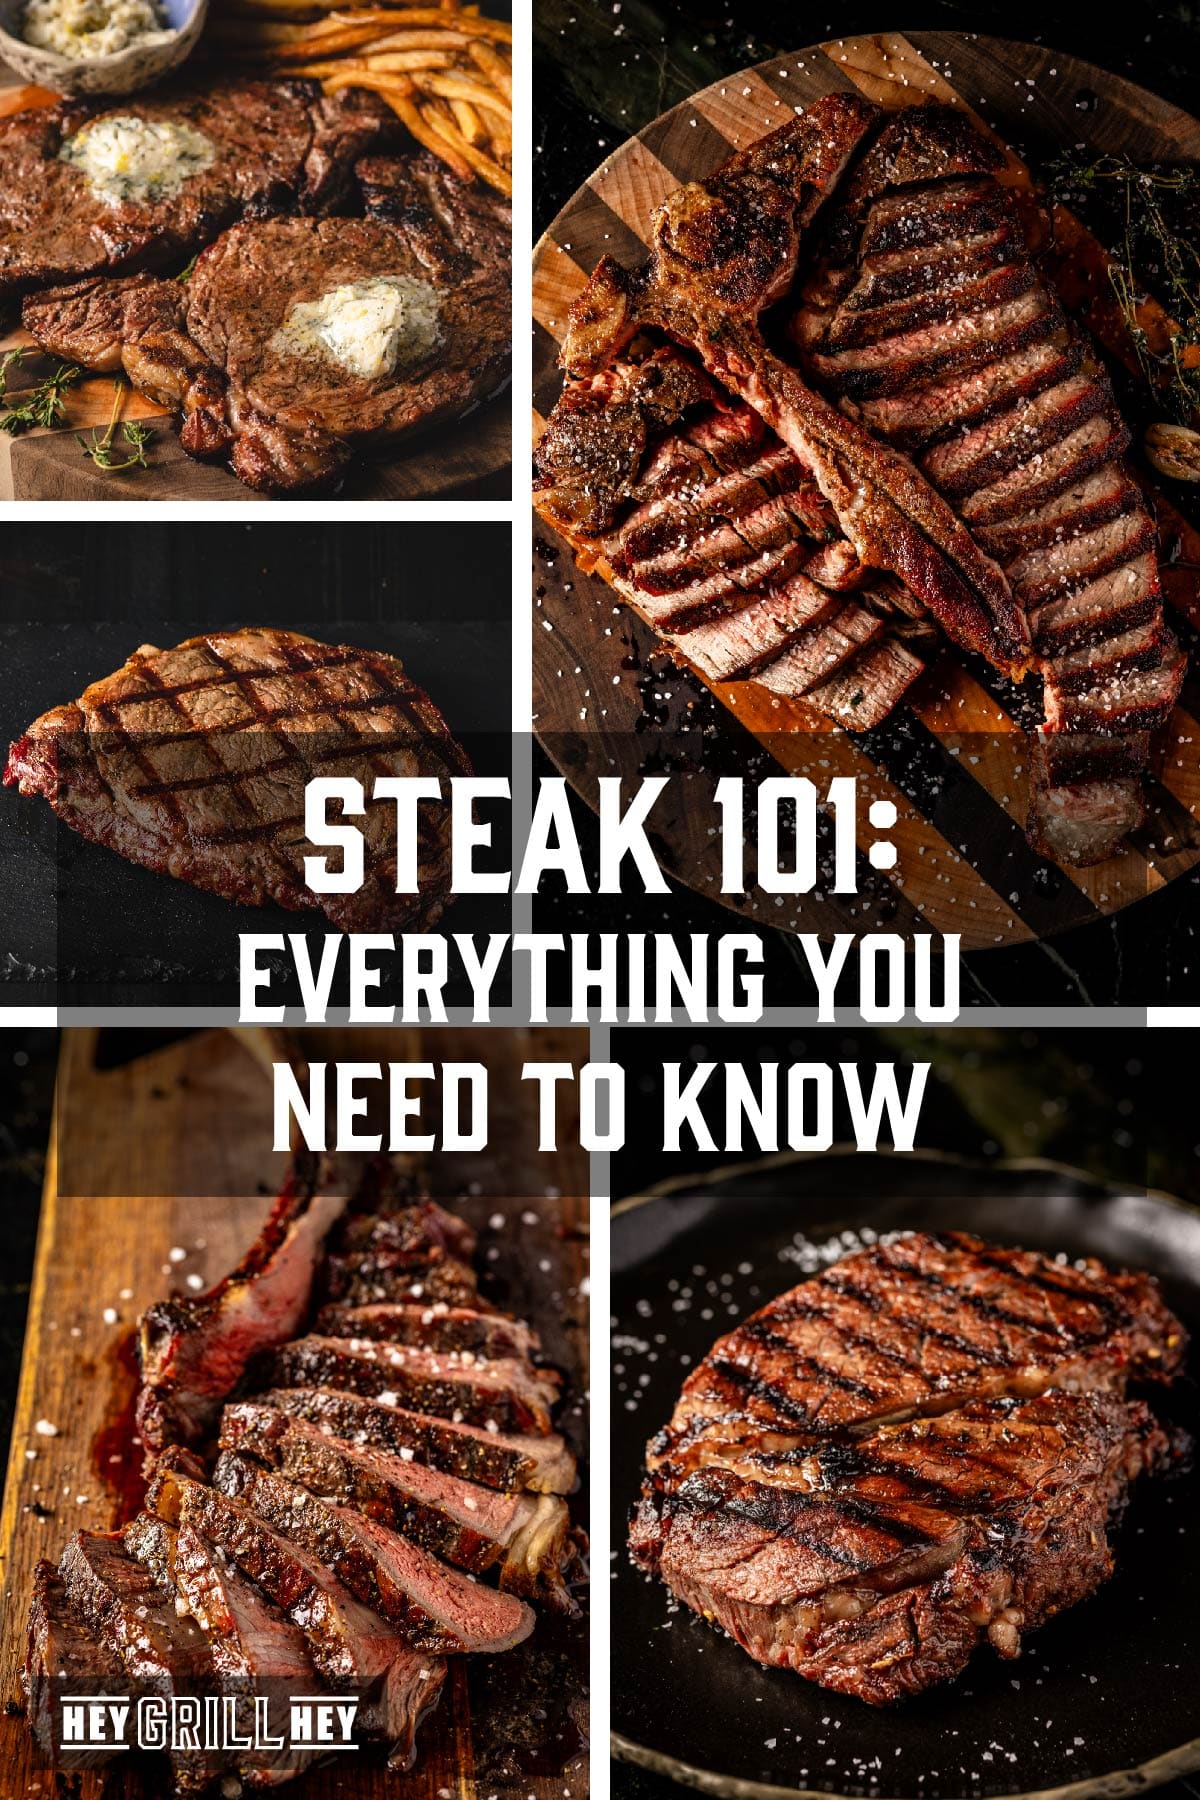 Various steaks on platters. Text reads "Steak 101: Everything you need to know".